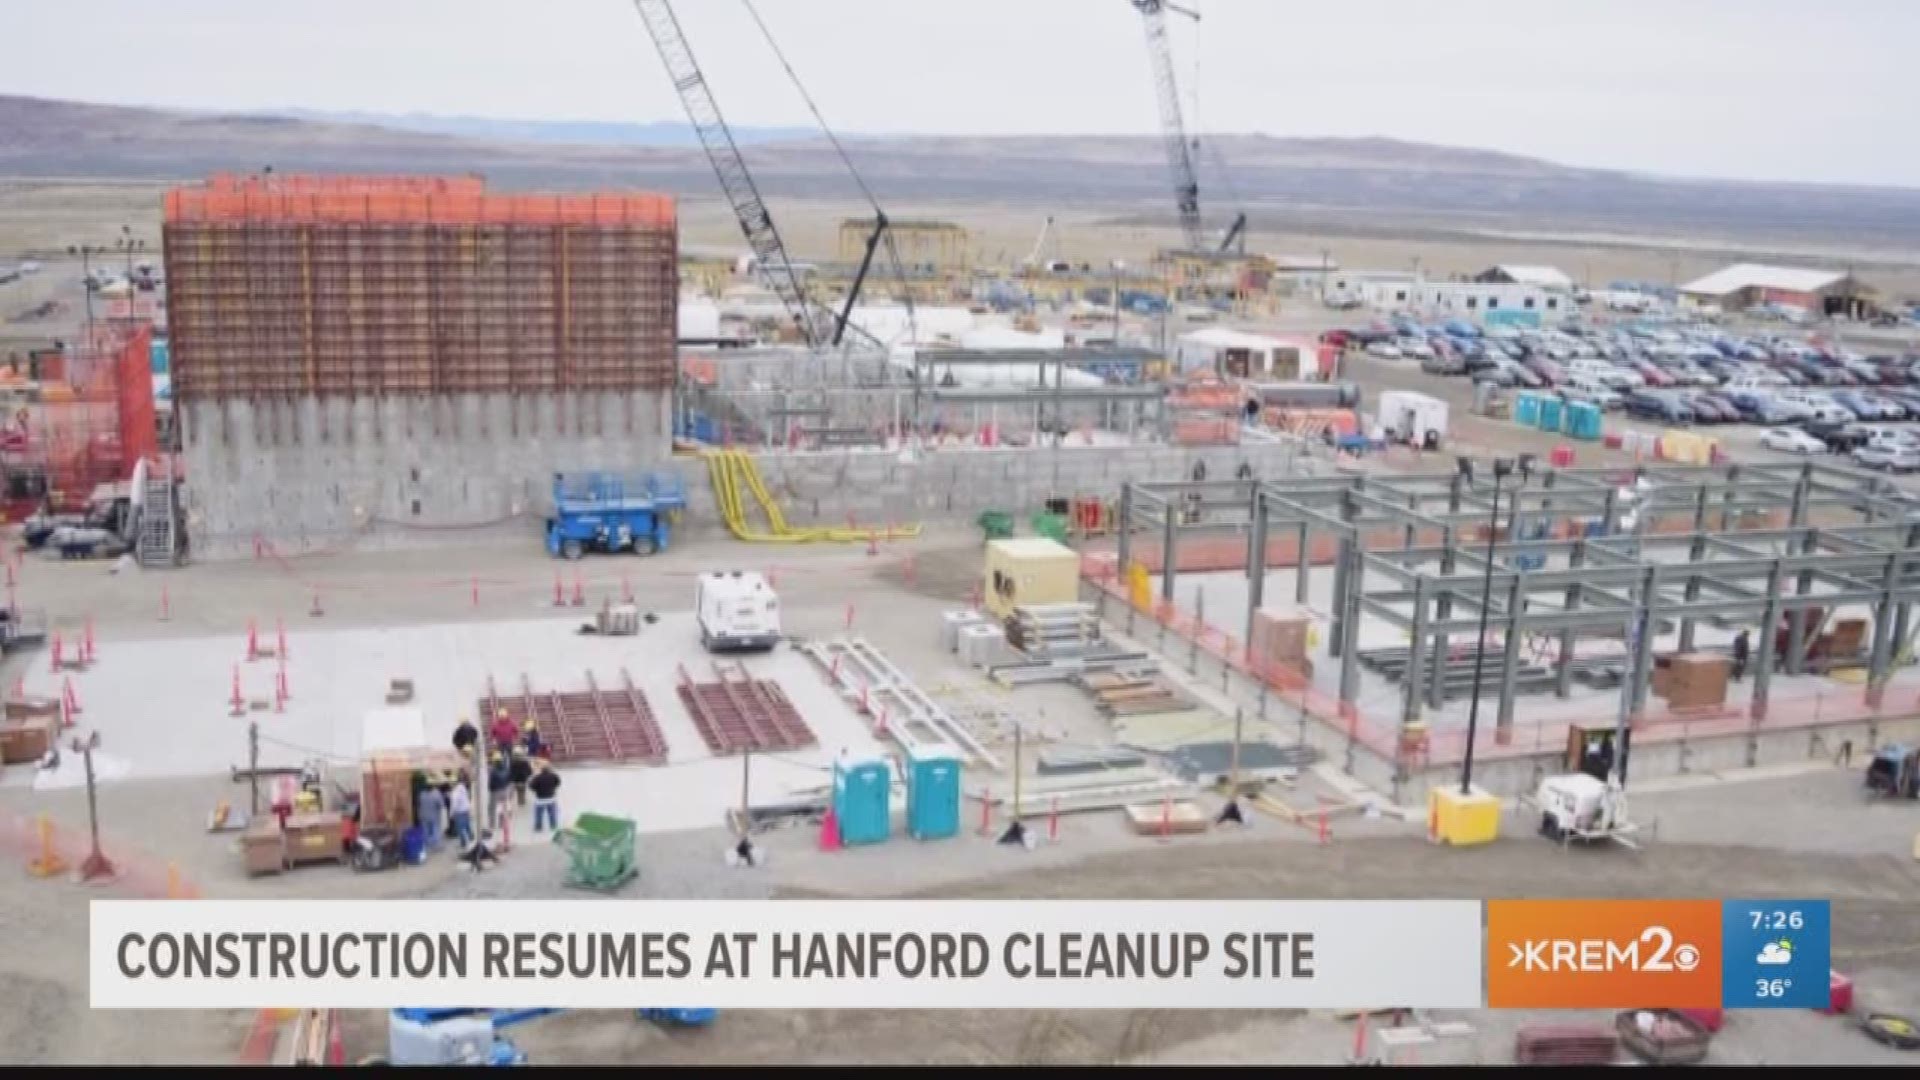 Construction continues at Hanford cleanup site